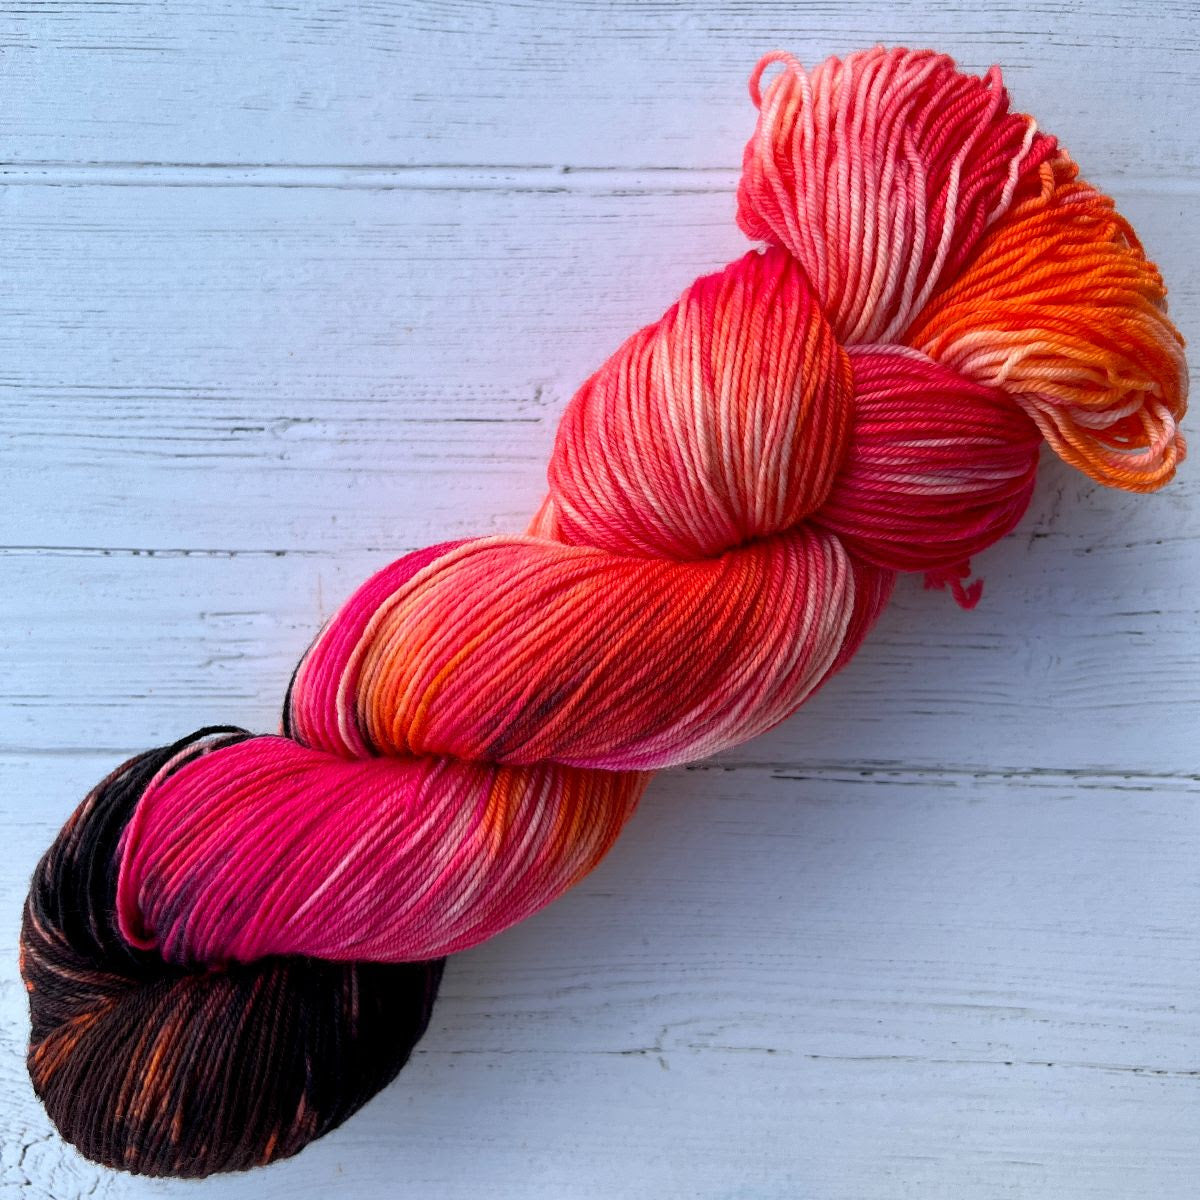 Feb 2023 Herstory: Lilith's Brood, a pink/black/orange skein twisted into a hank